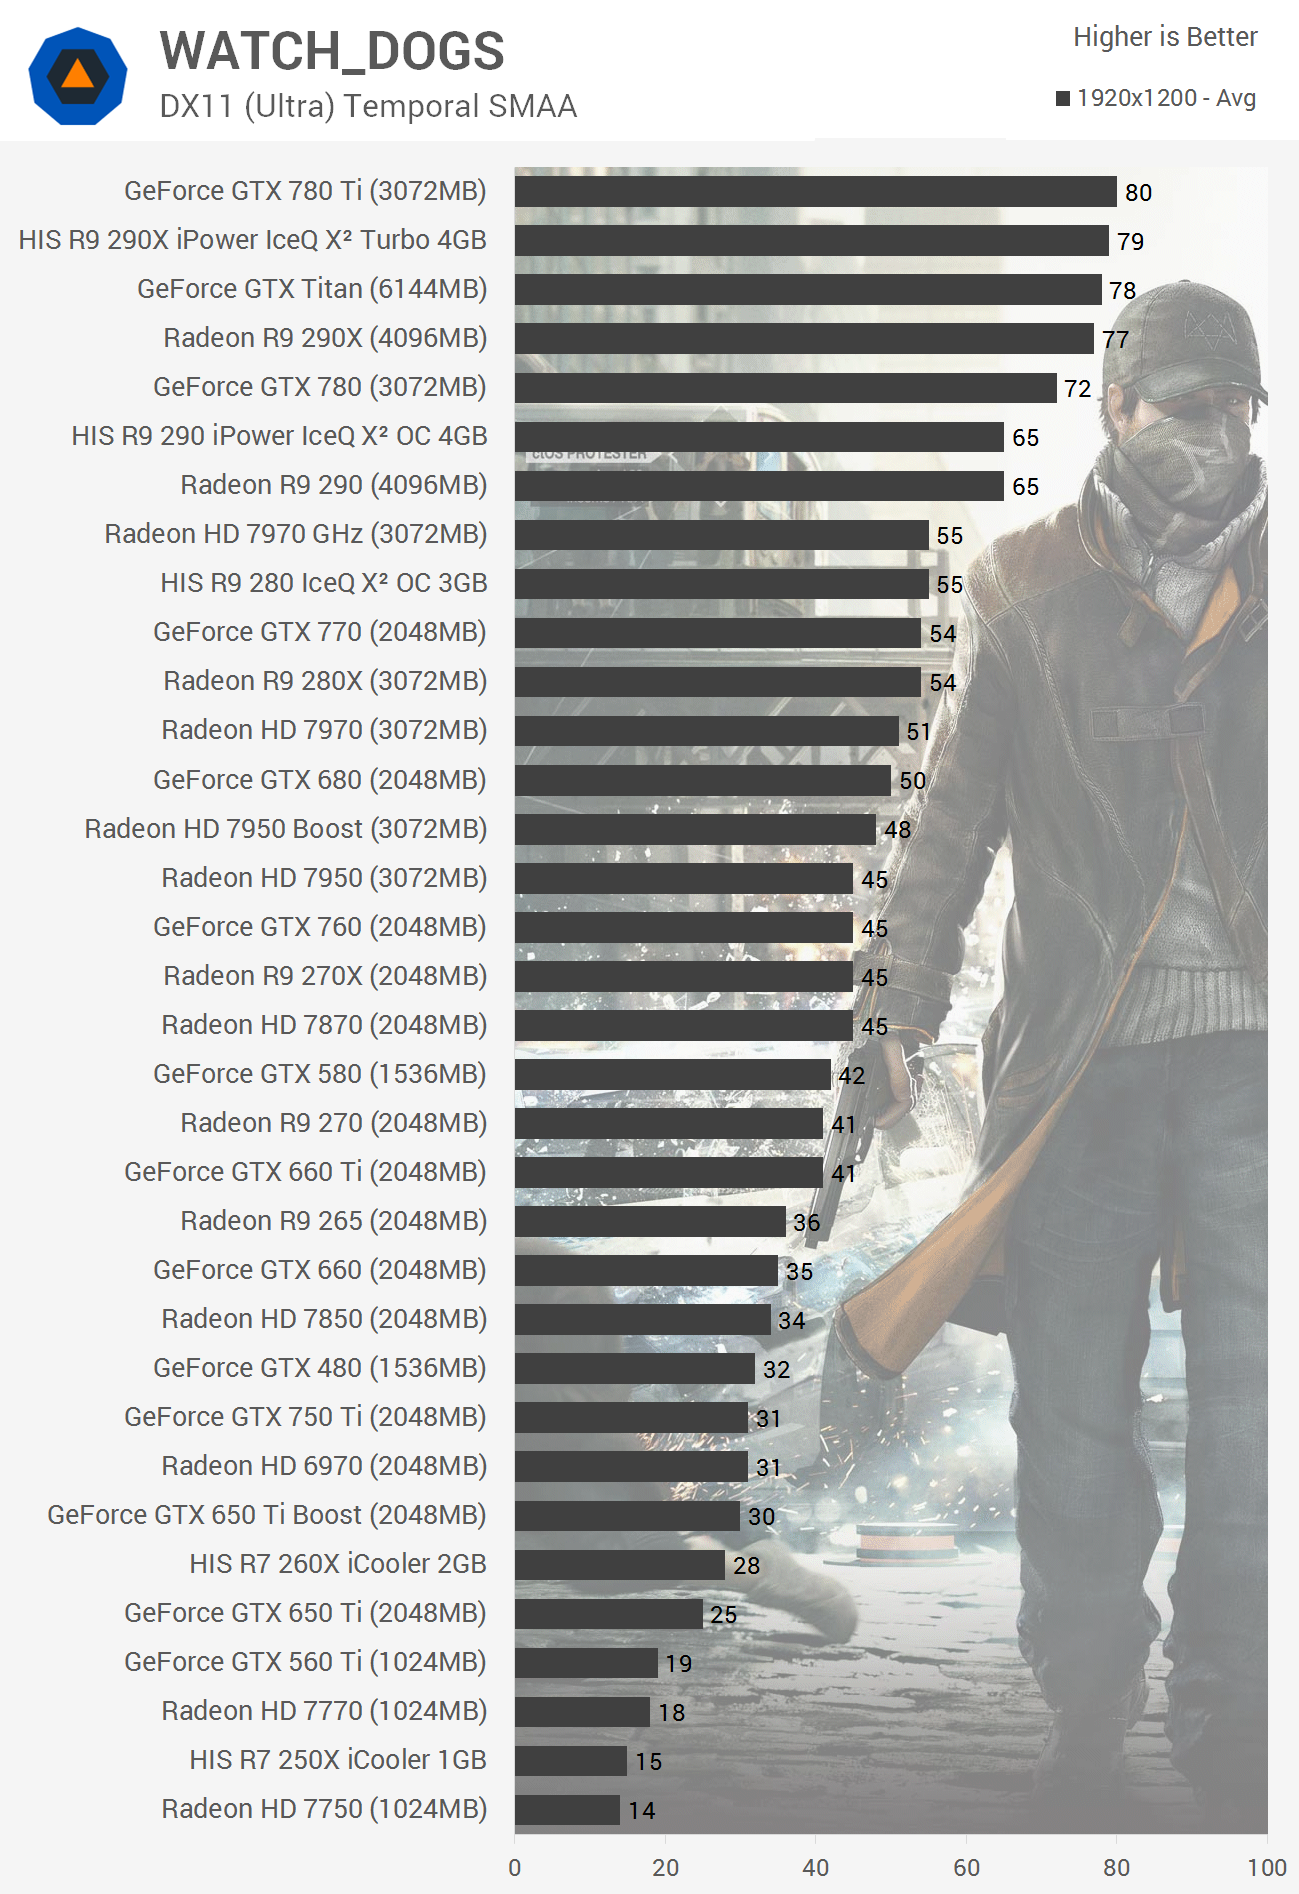 Watch Dogs Benchmarked: How Does Your PC Stack Up?